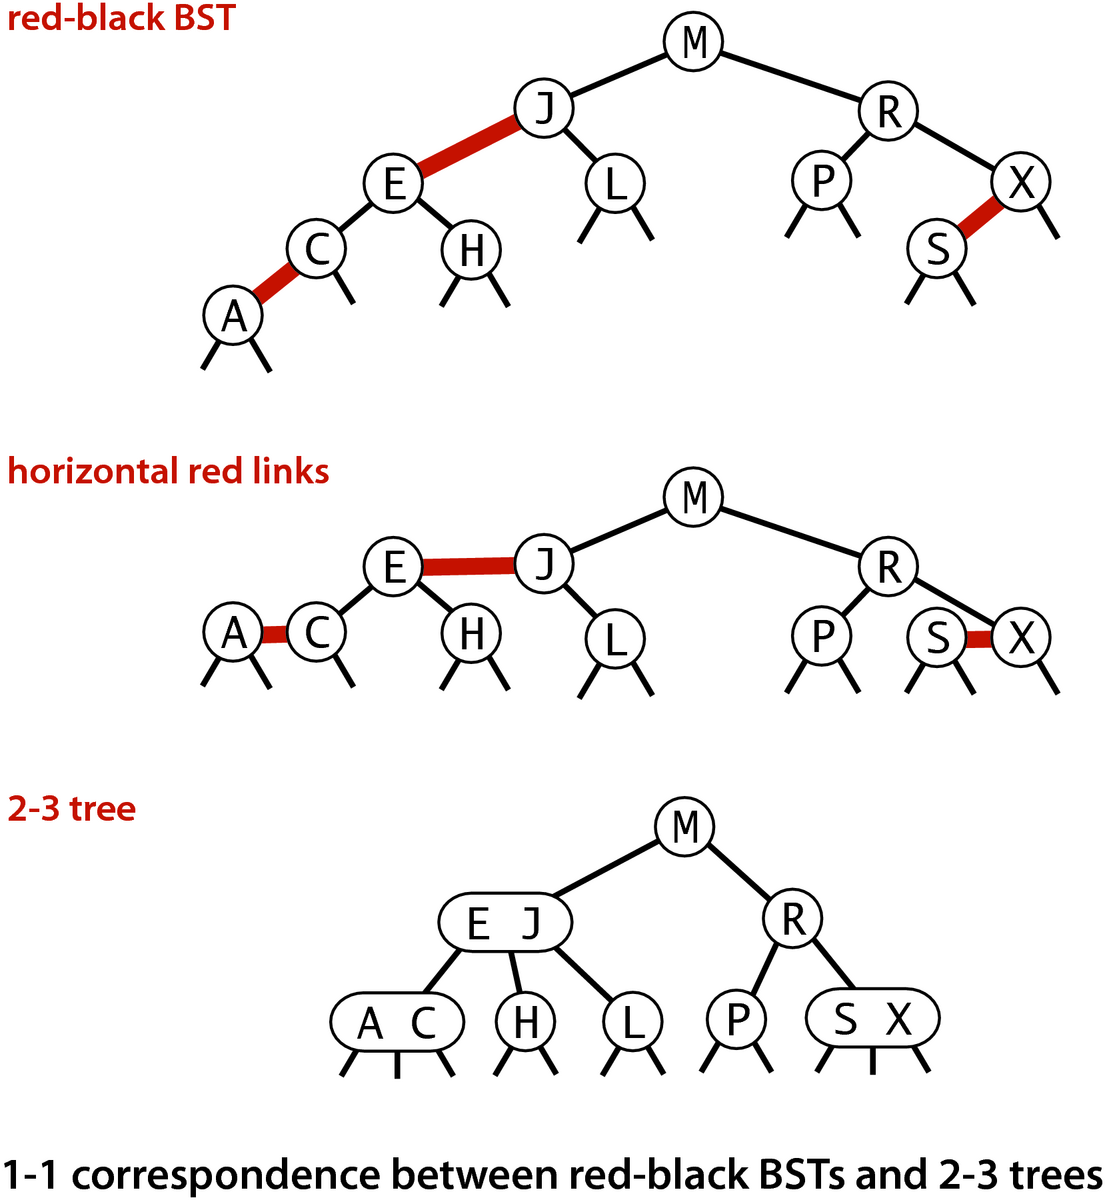 [1-1 correspondence between red-black BSTs and 2-3 trees]